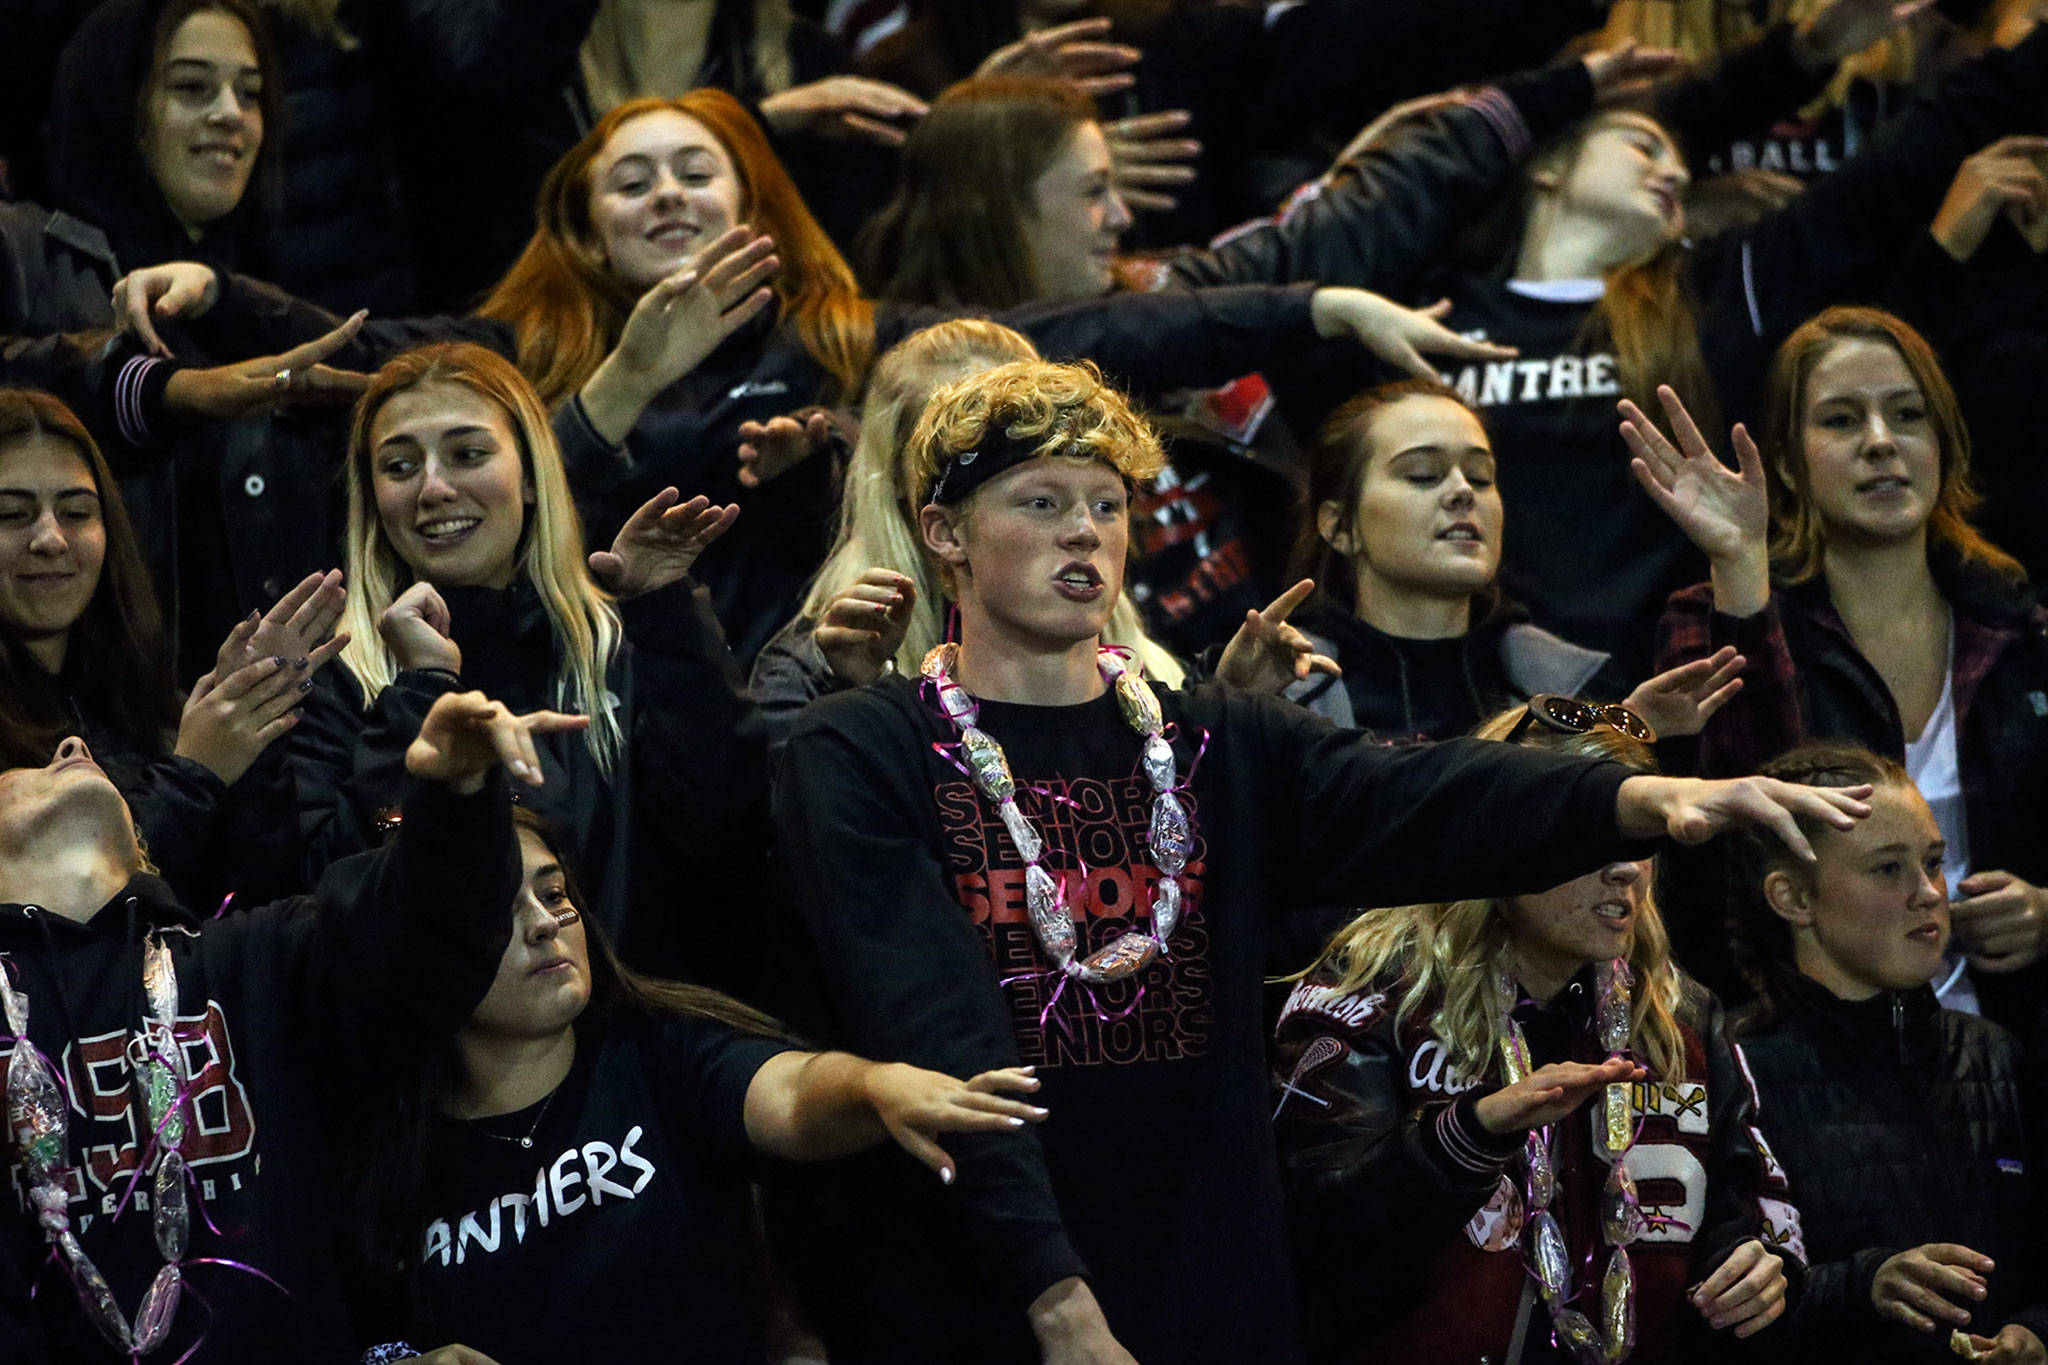 Snohomish fans cheer during a game at Veterans Memorial Stadium in Snohomish on Oct. 25, 2019. (Kevin Clark / Herald file)